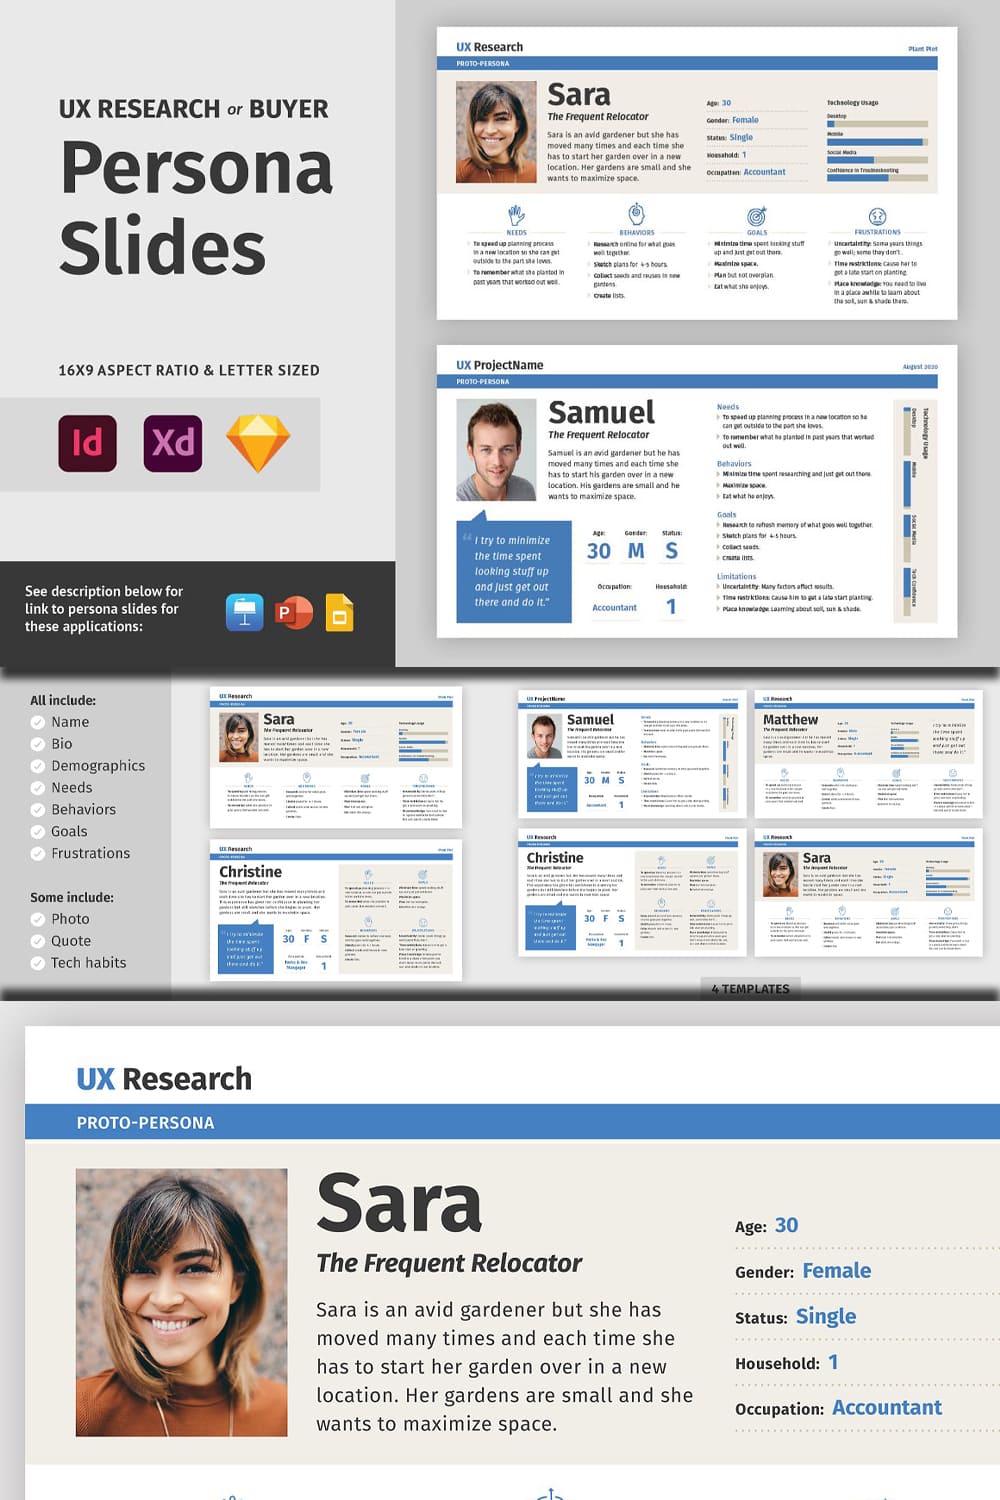 Persona Slides for User Research pinterest image.